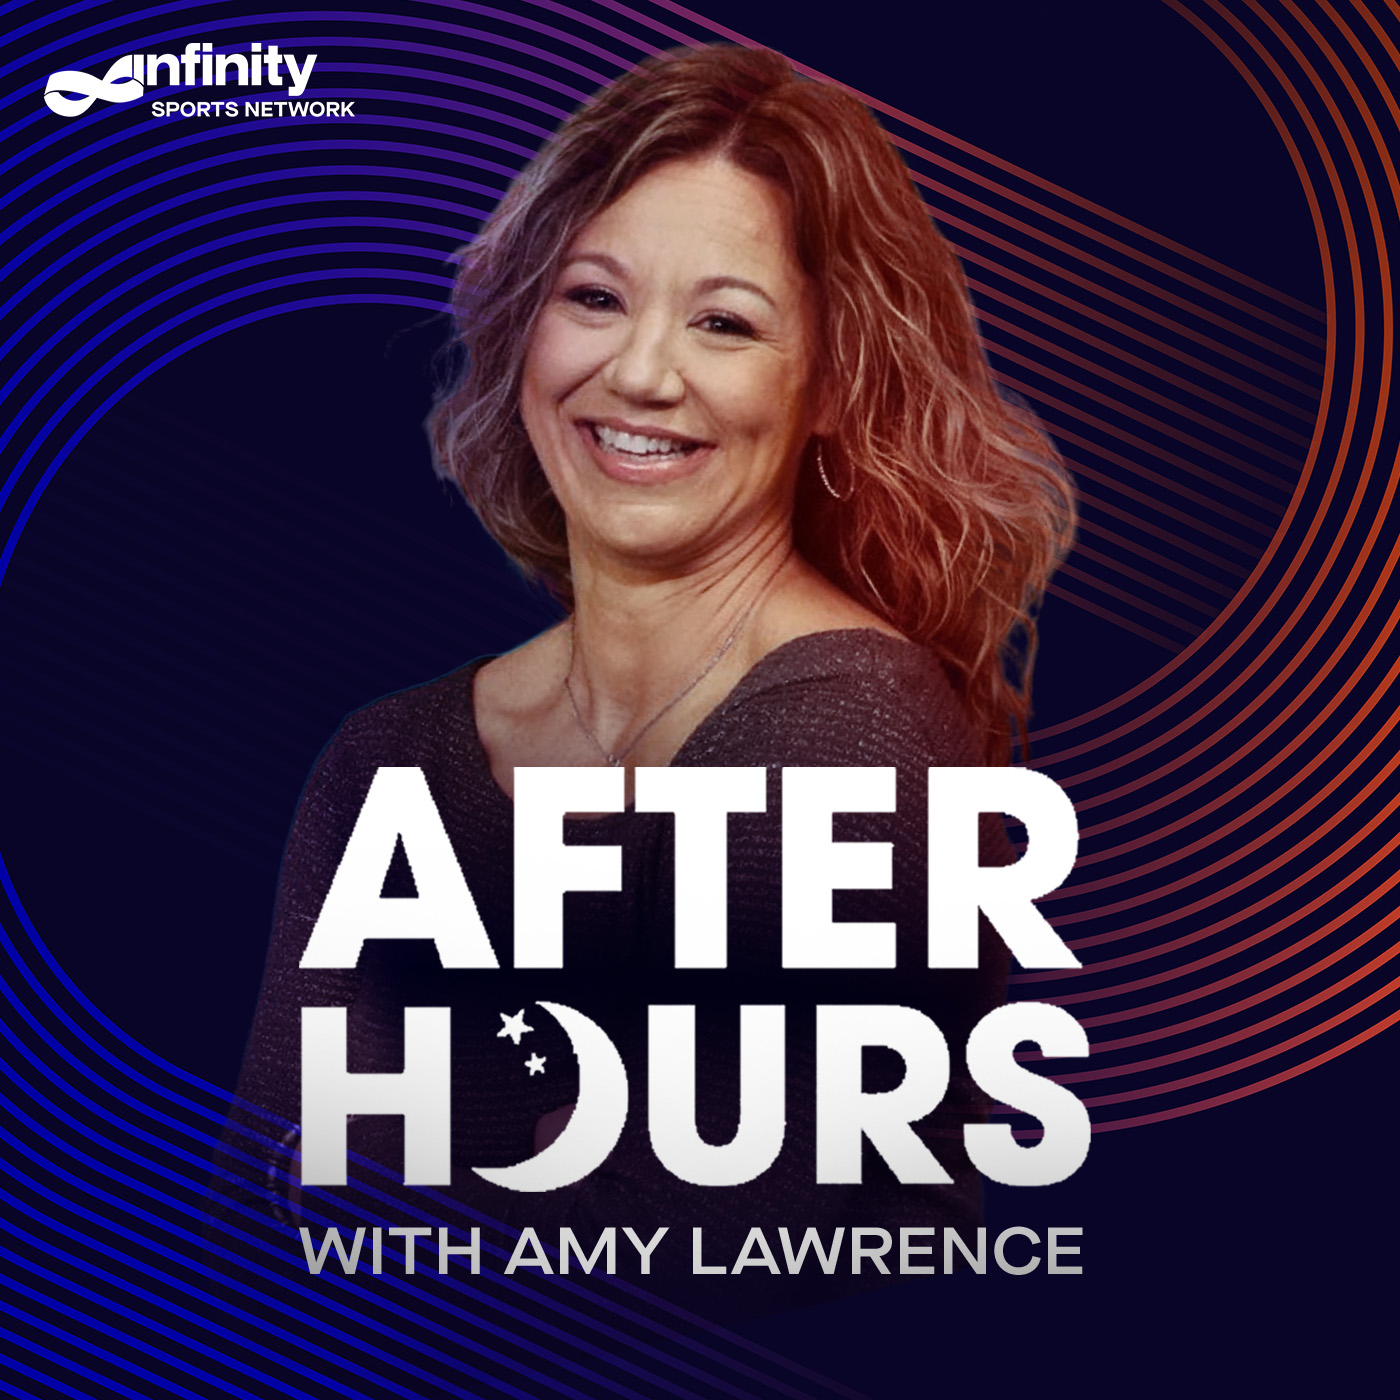 8-24-21 After Hours with Amy Lawrence PODCAST: Hour 1